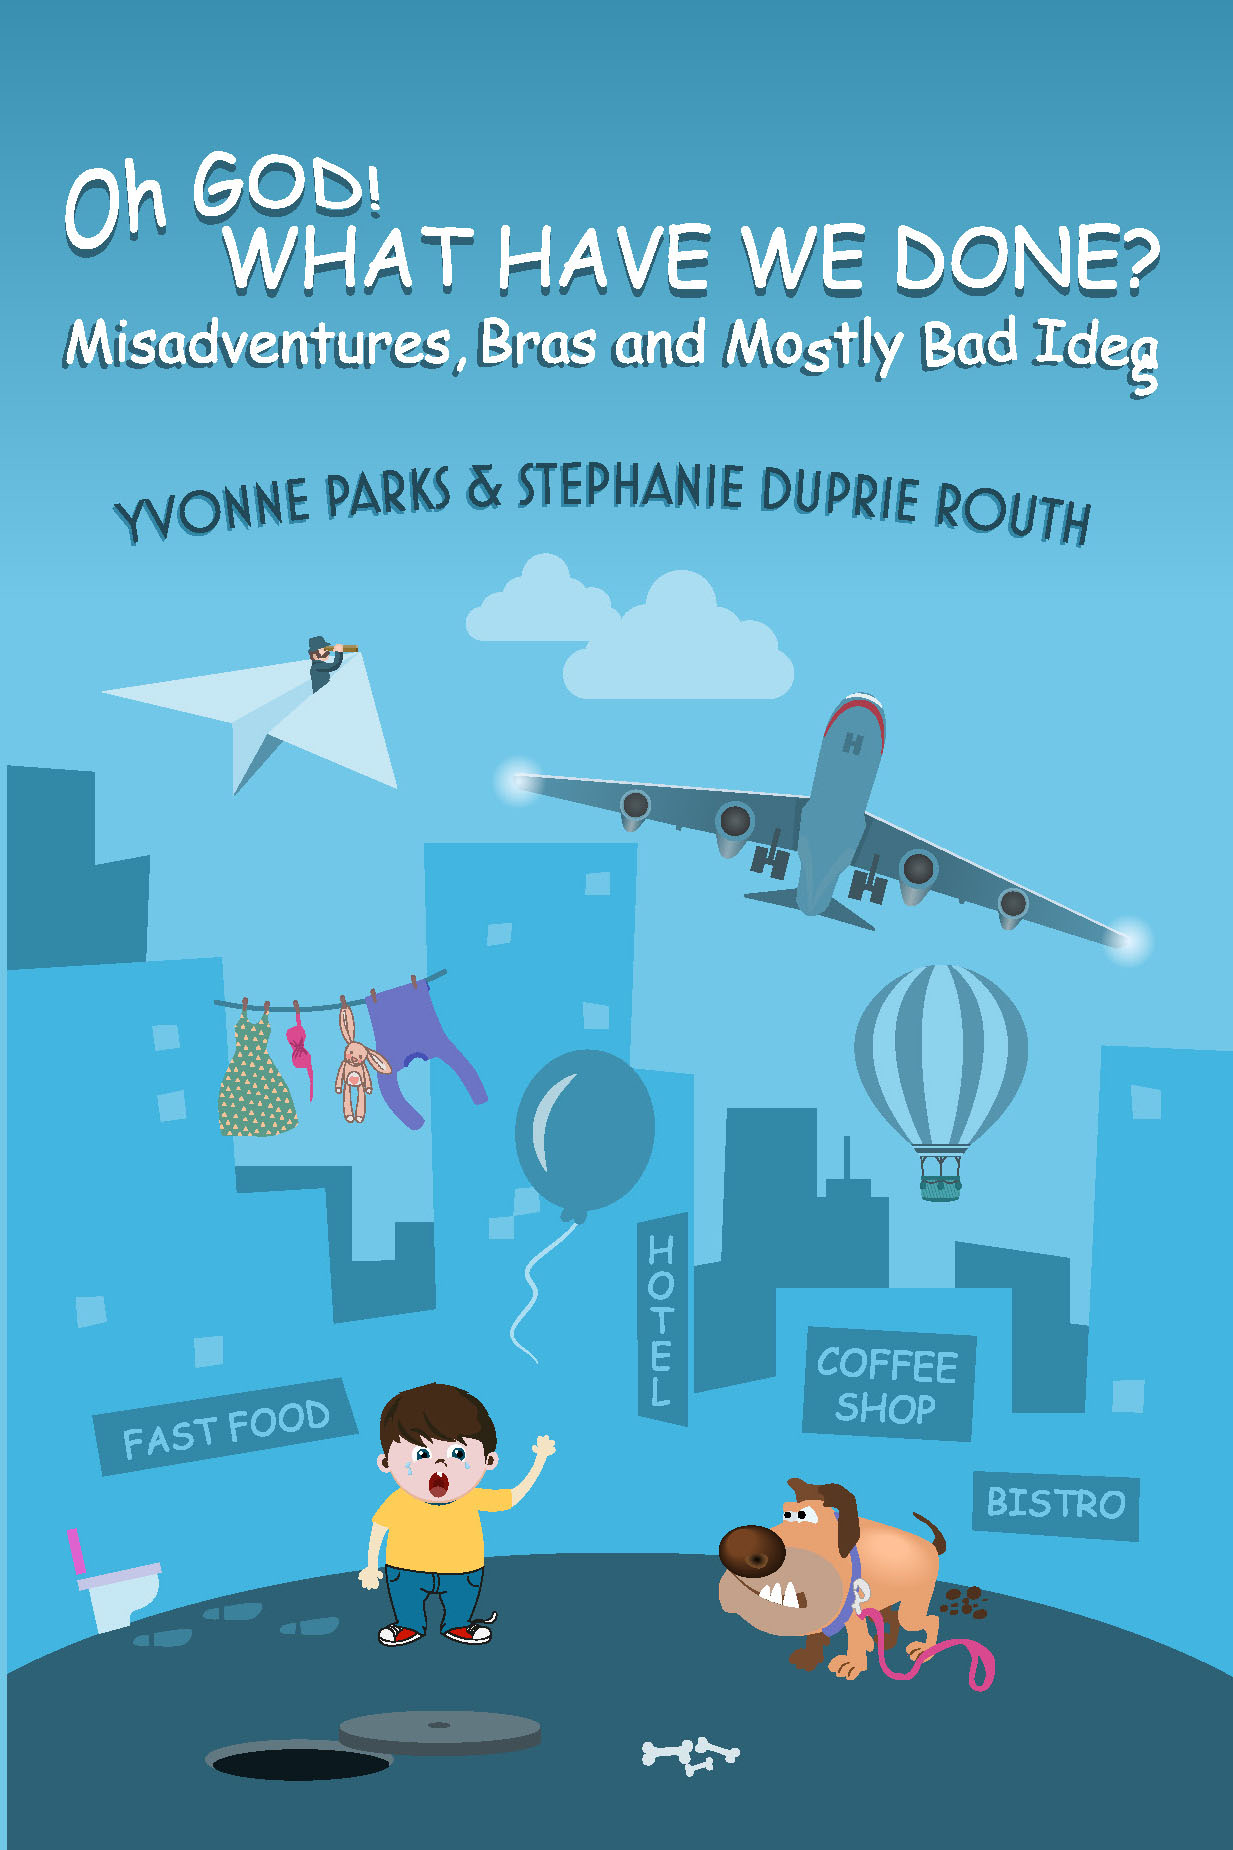 FREE: Oh God! What Have We Done? Misadventures, Bras and Mostly Bad Ideas by Yvonne Parks and Stephanie Duprie Routh